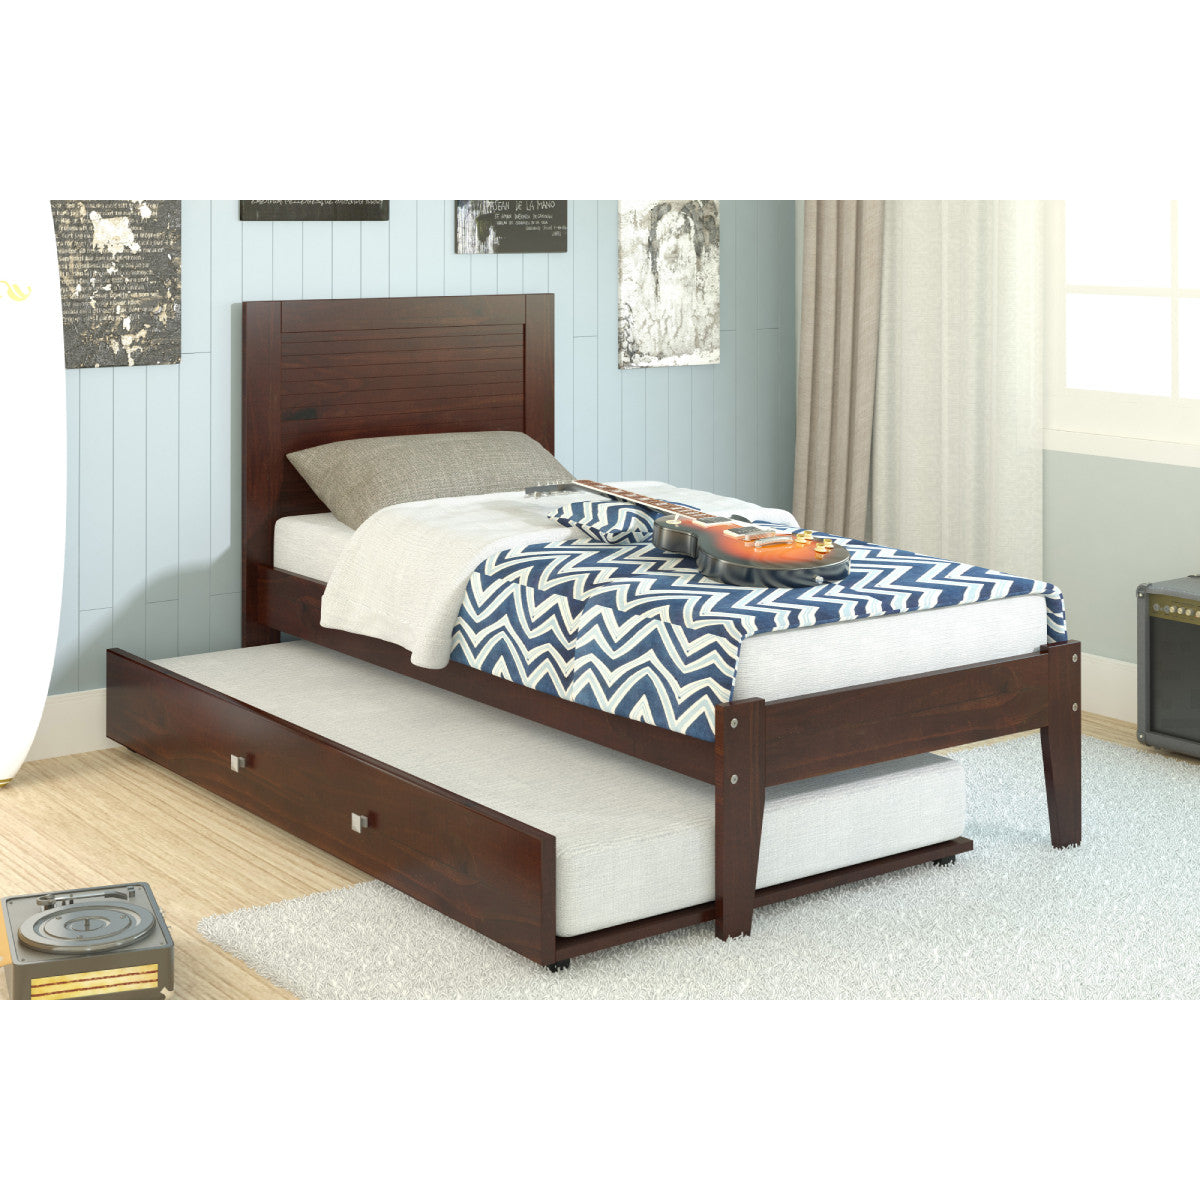 TWIN PANEL BED WITH TRUNDLE BED CAPPUCCINO FINISH